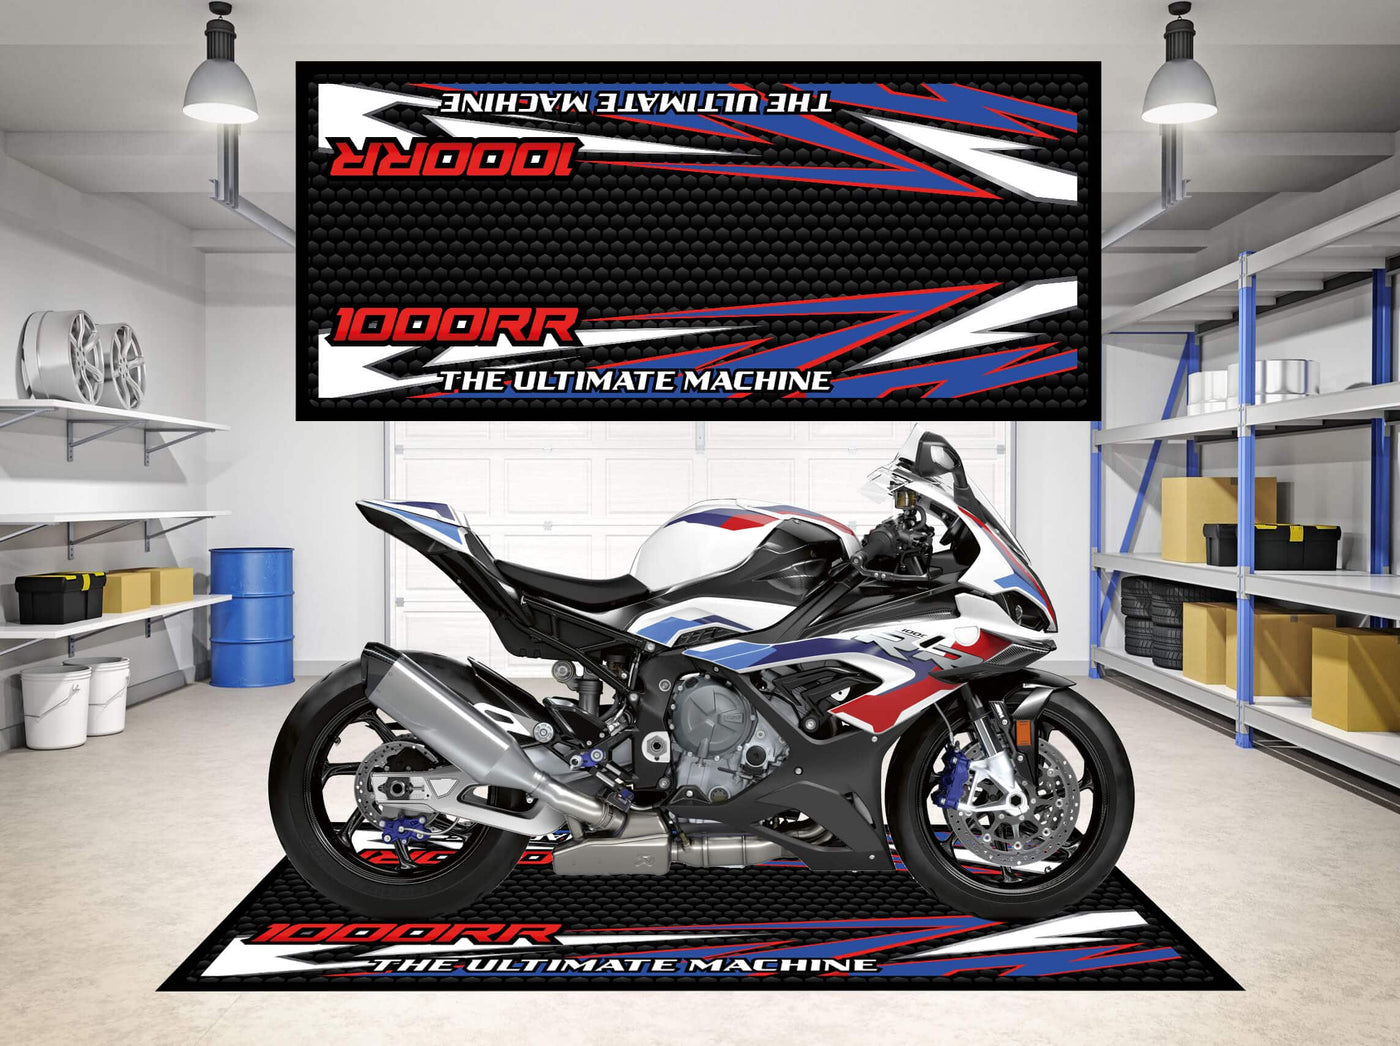 Designed Motorcycle Mat for BMW 1000RR - Motorcycle Pit Mat